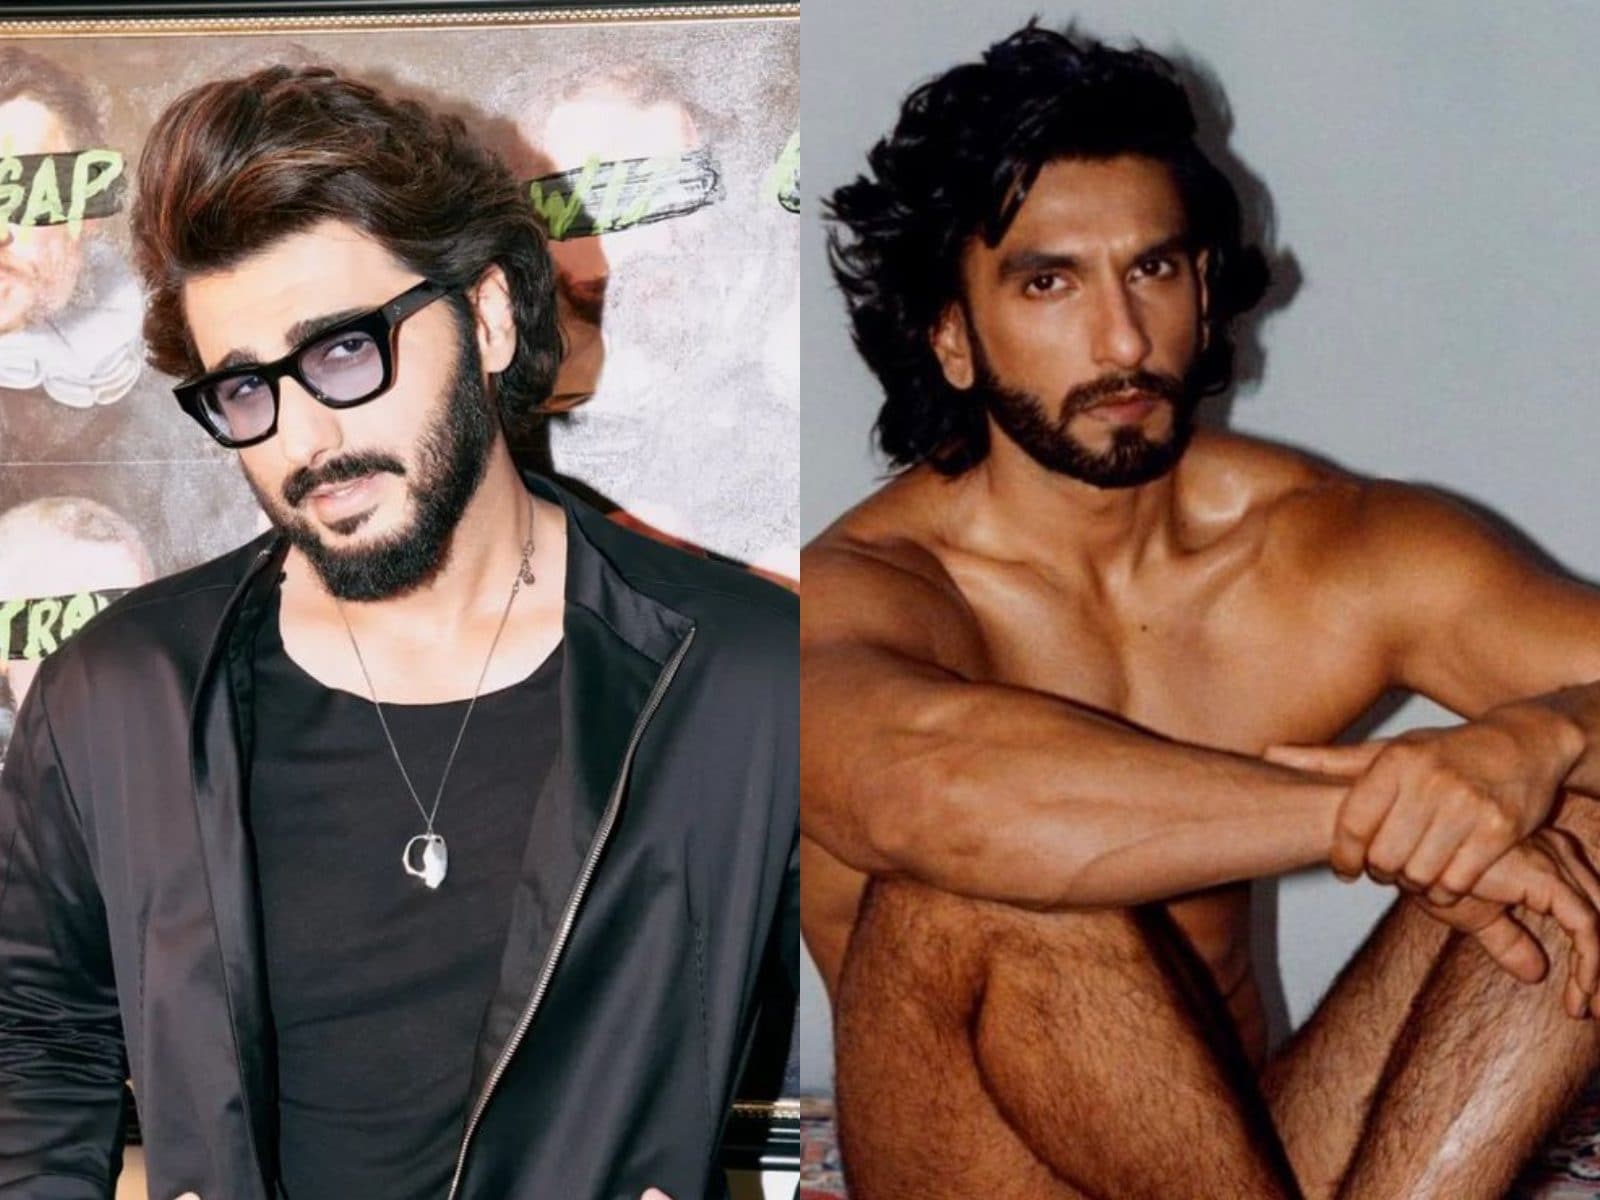 Madhuri Dixit Ki Nagna Photo - Arjun Kapoor Reacts To Ranveer Singh's Nude Photoshoot: 'He Should Be  Allowed To Be Himself' - News18